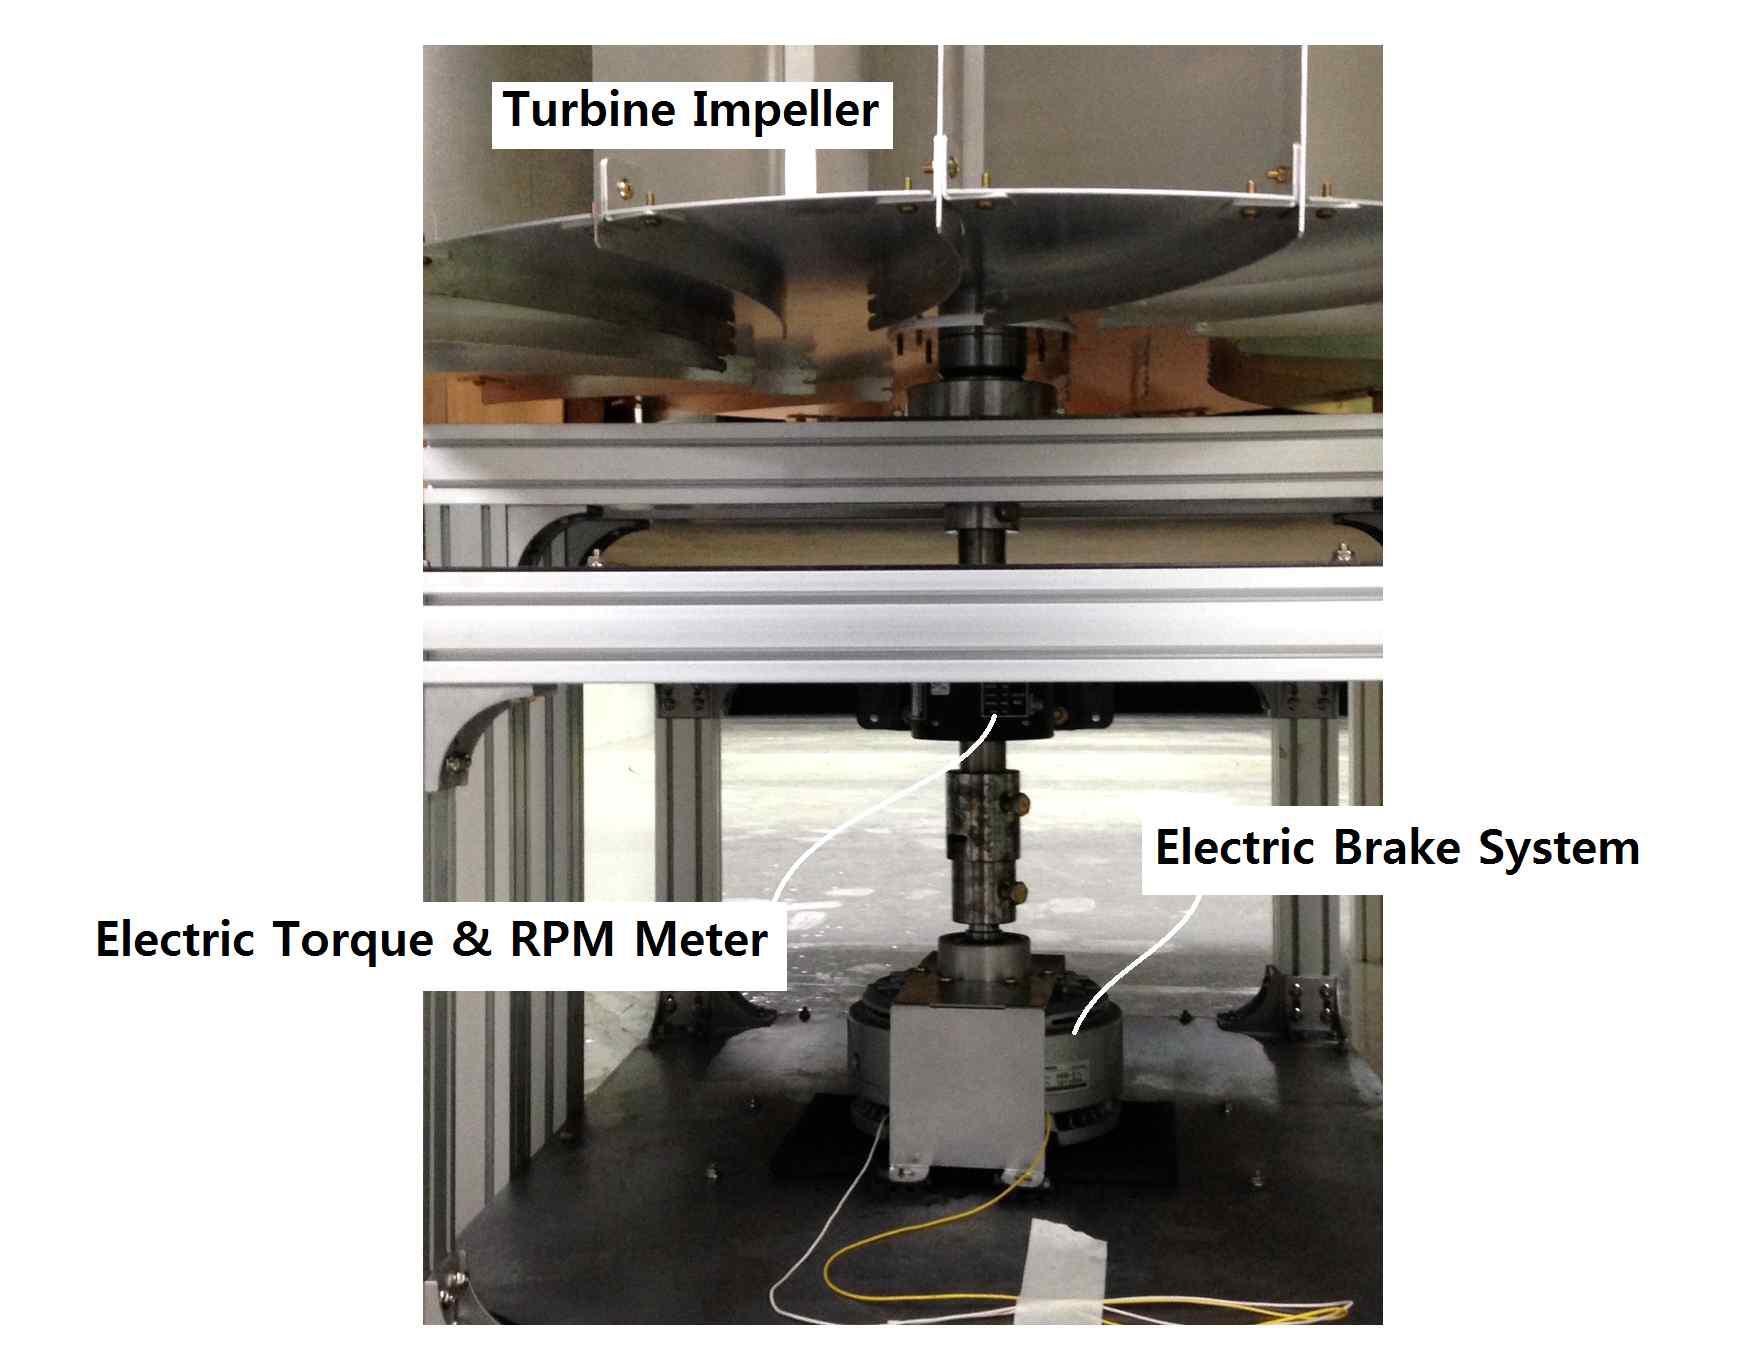 Assembly of the electric brake system and digital torque meter with the model turbine impeller